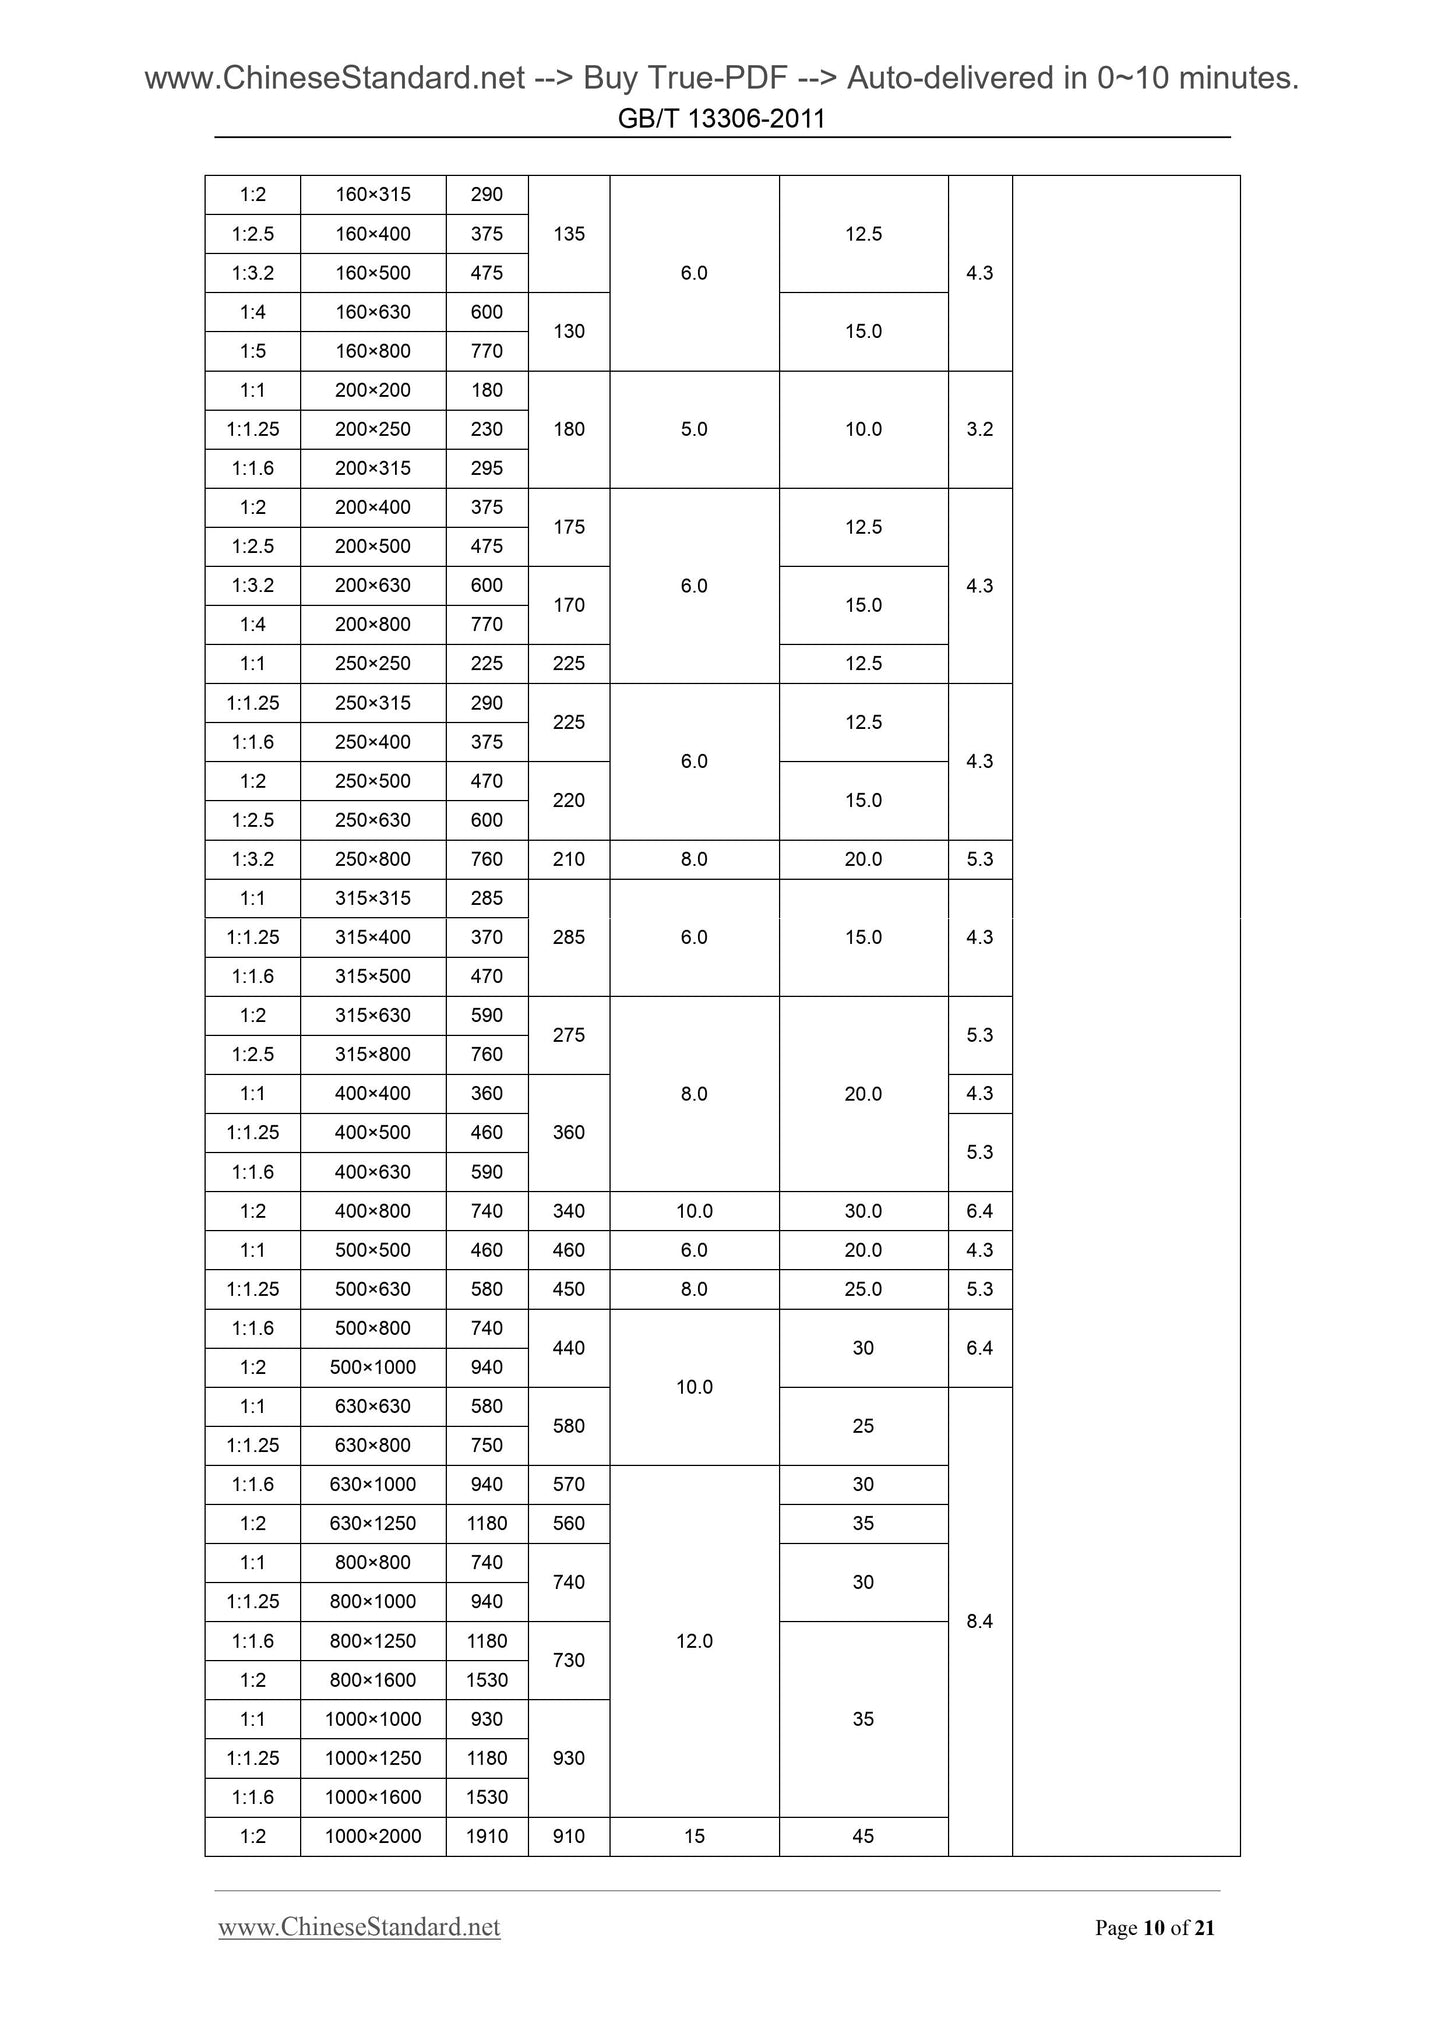 GB/T 13306-2011 Page 6